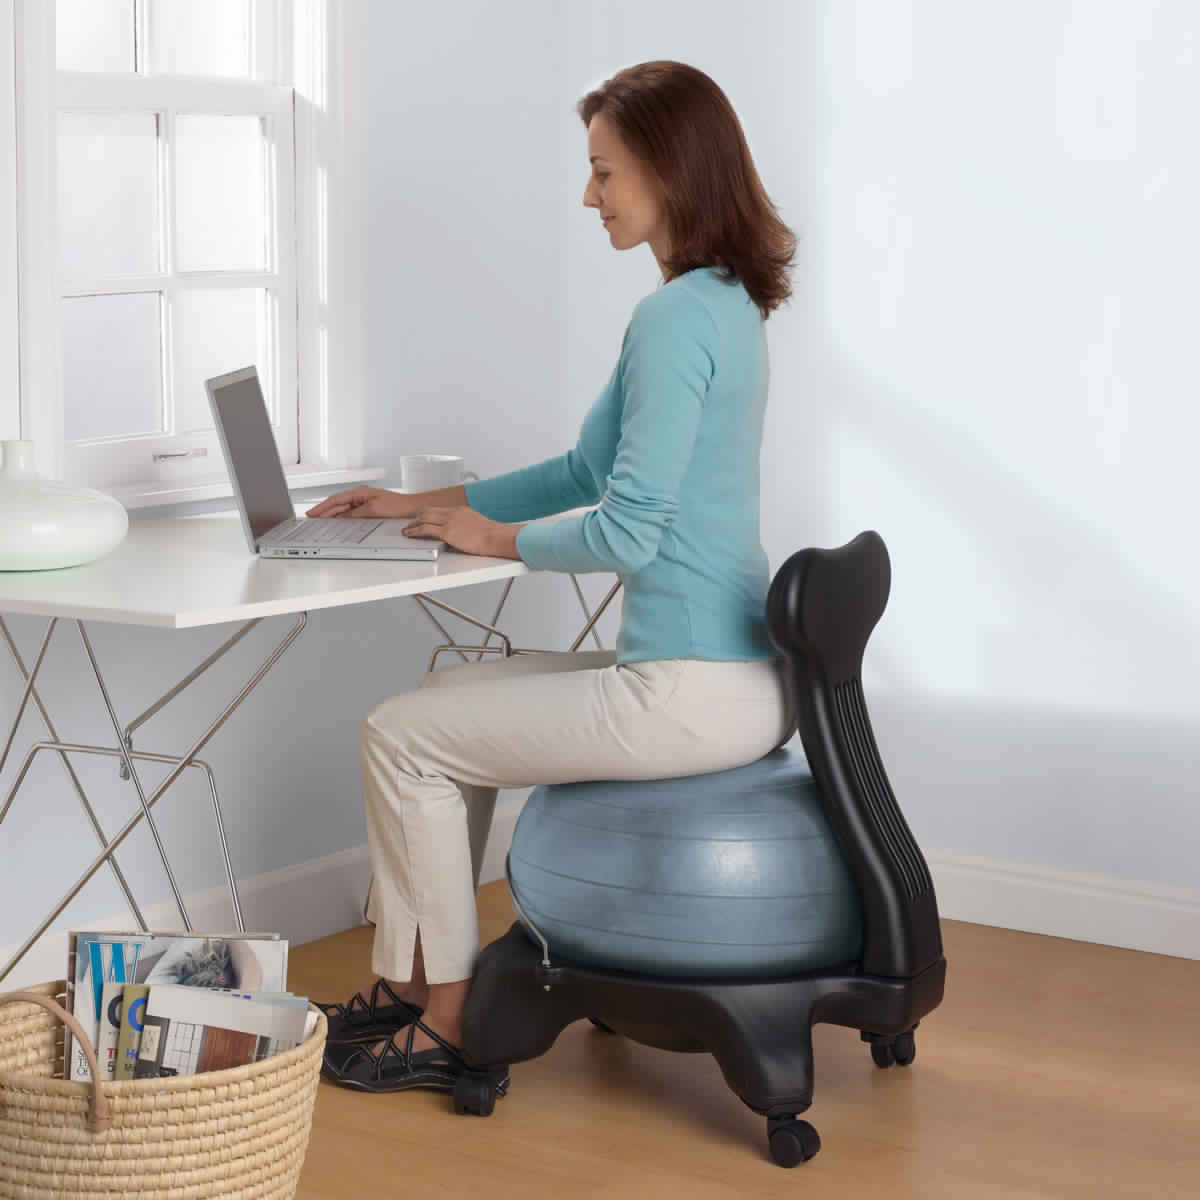 Balance-Ball-Chair-Yoga Benefits of using Yoga Ball Chair for your Home or Office